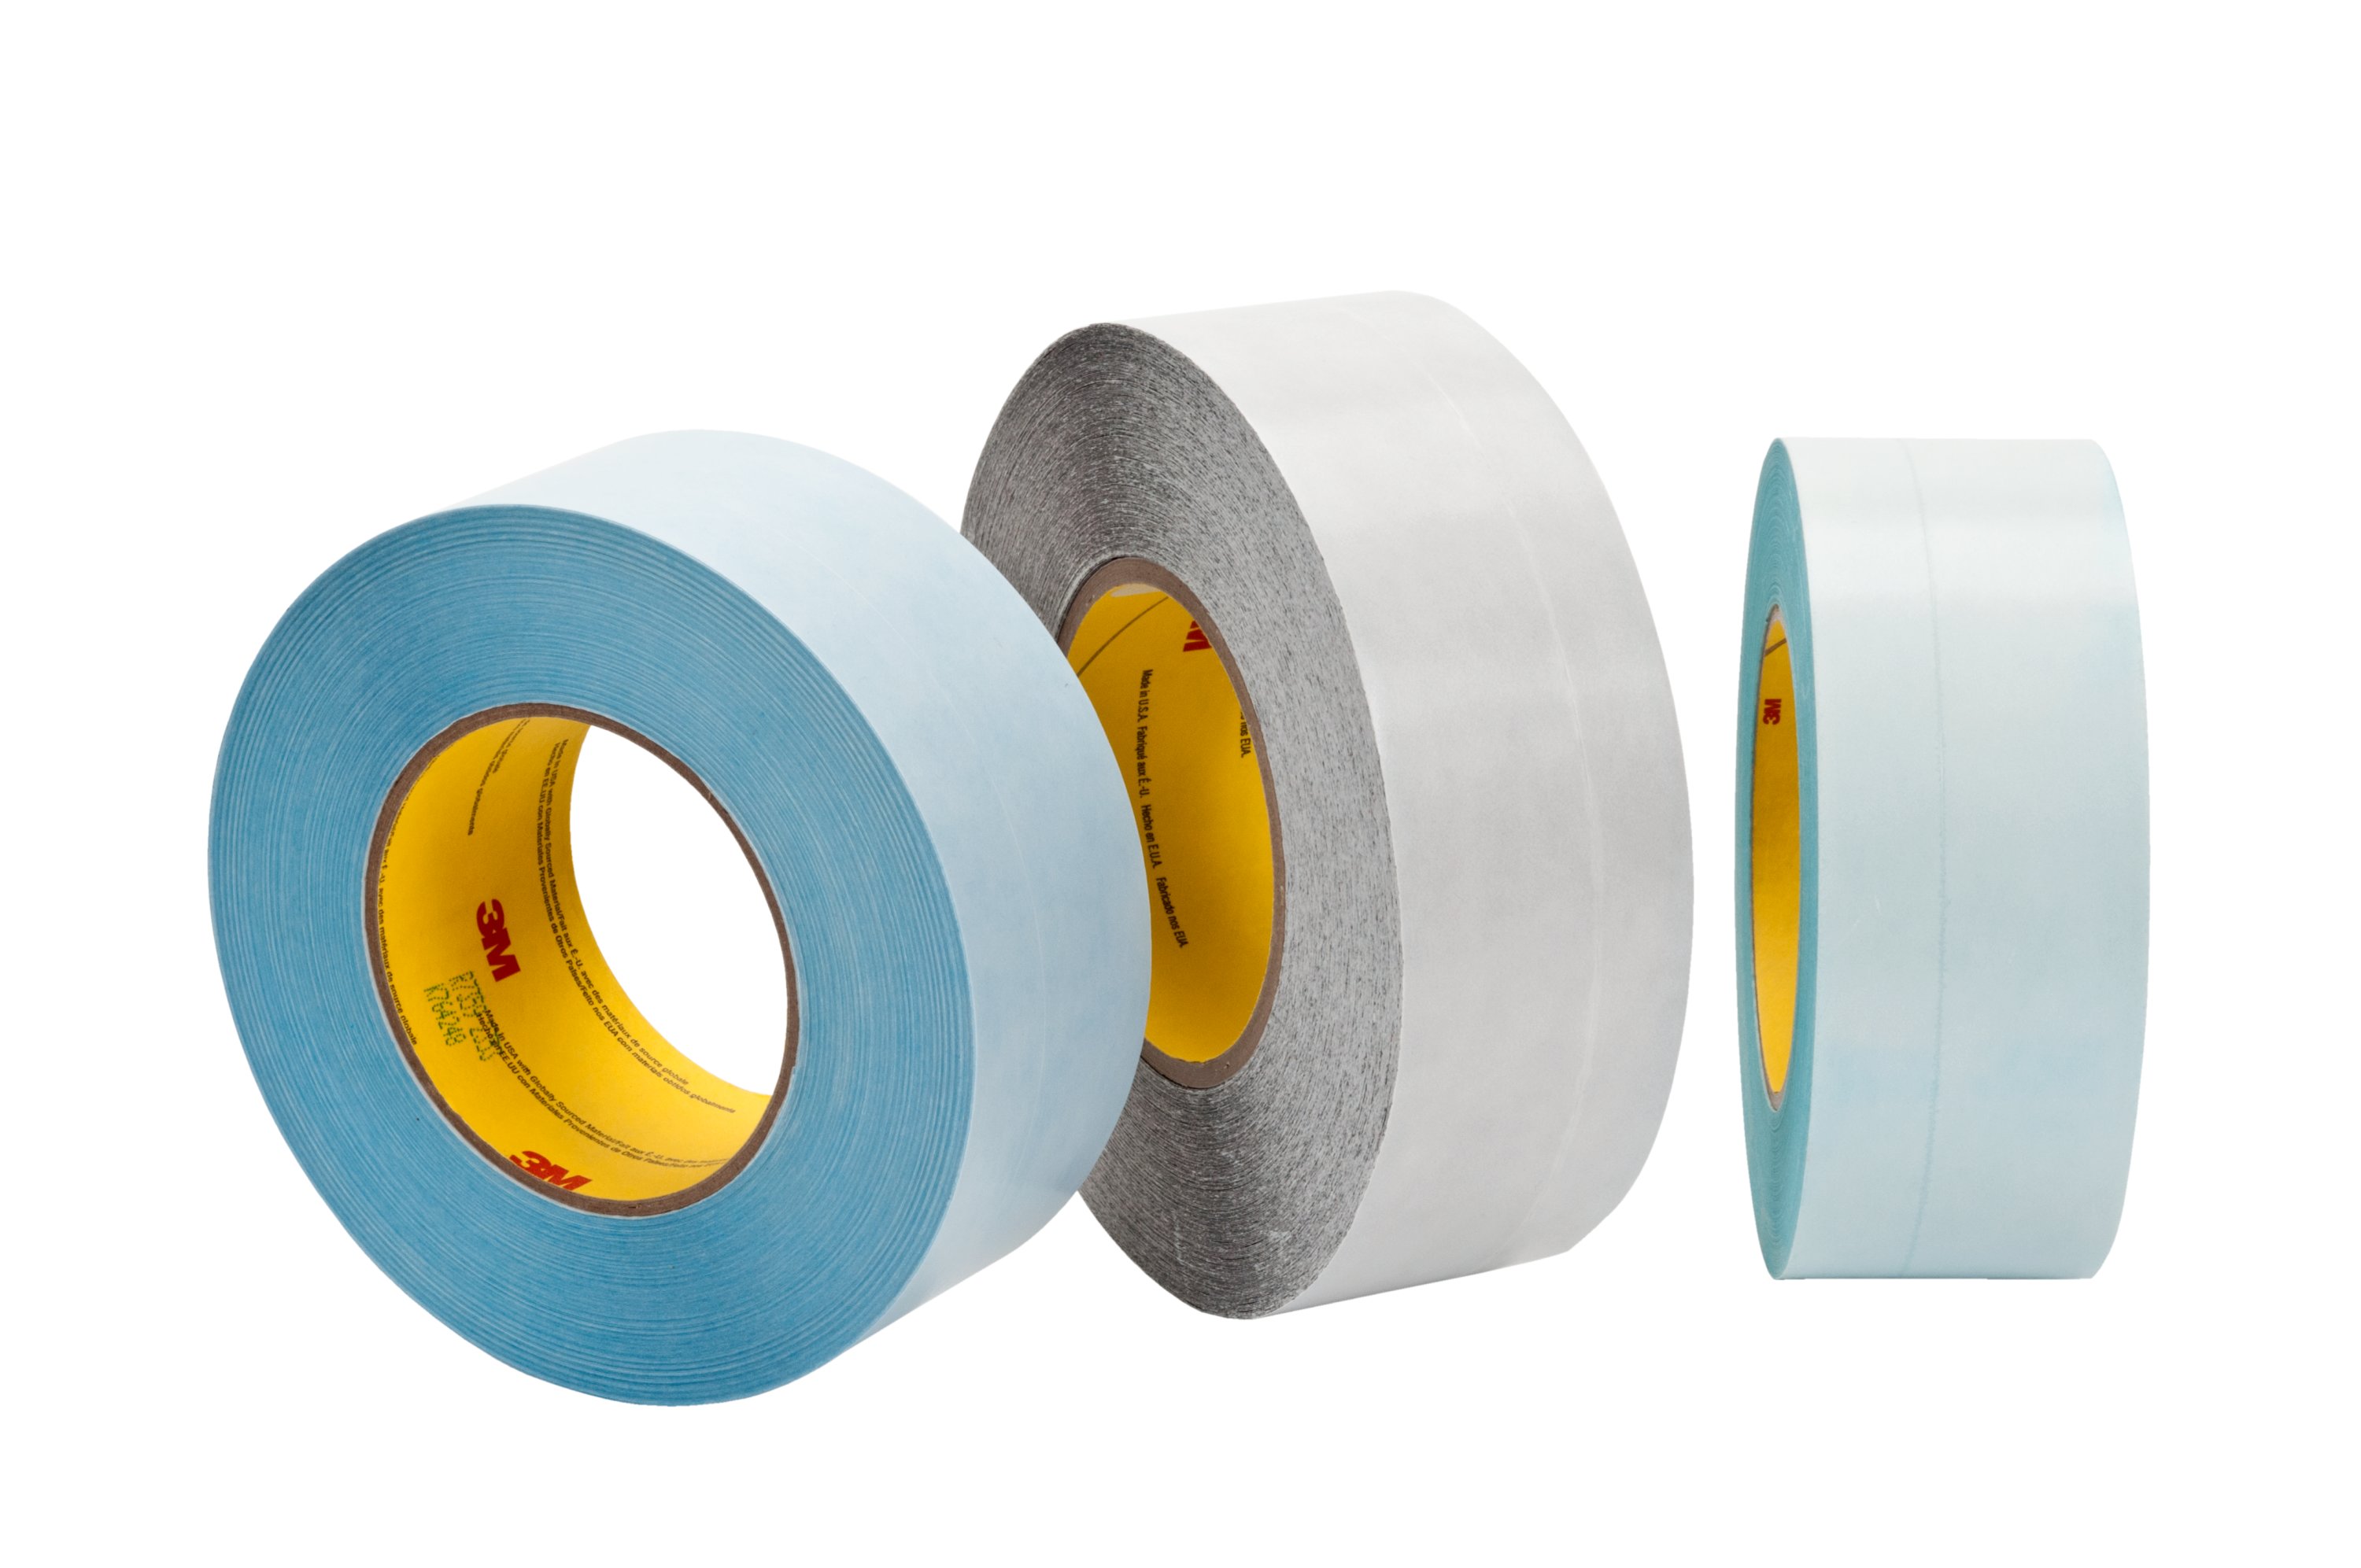 Splicing tape product family